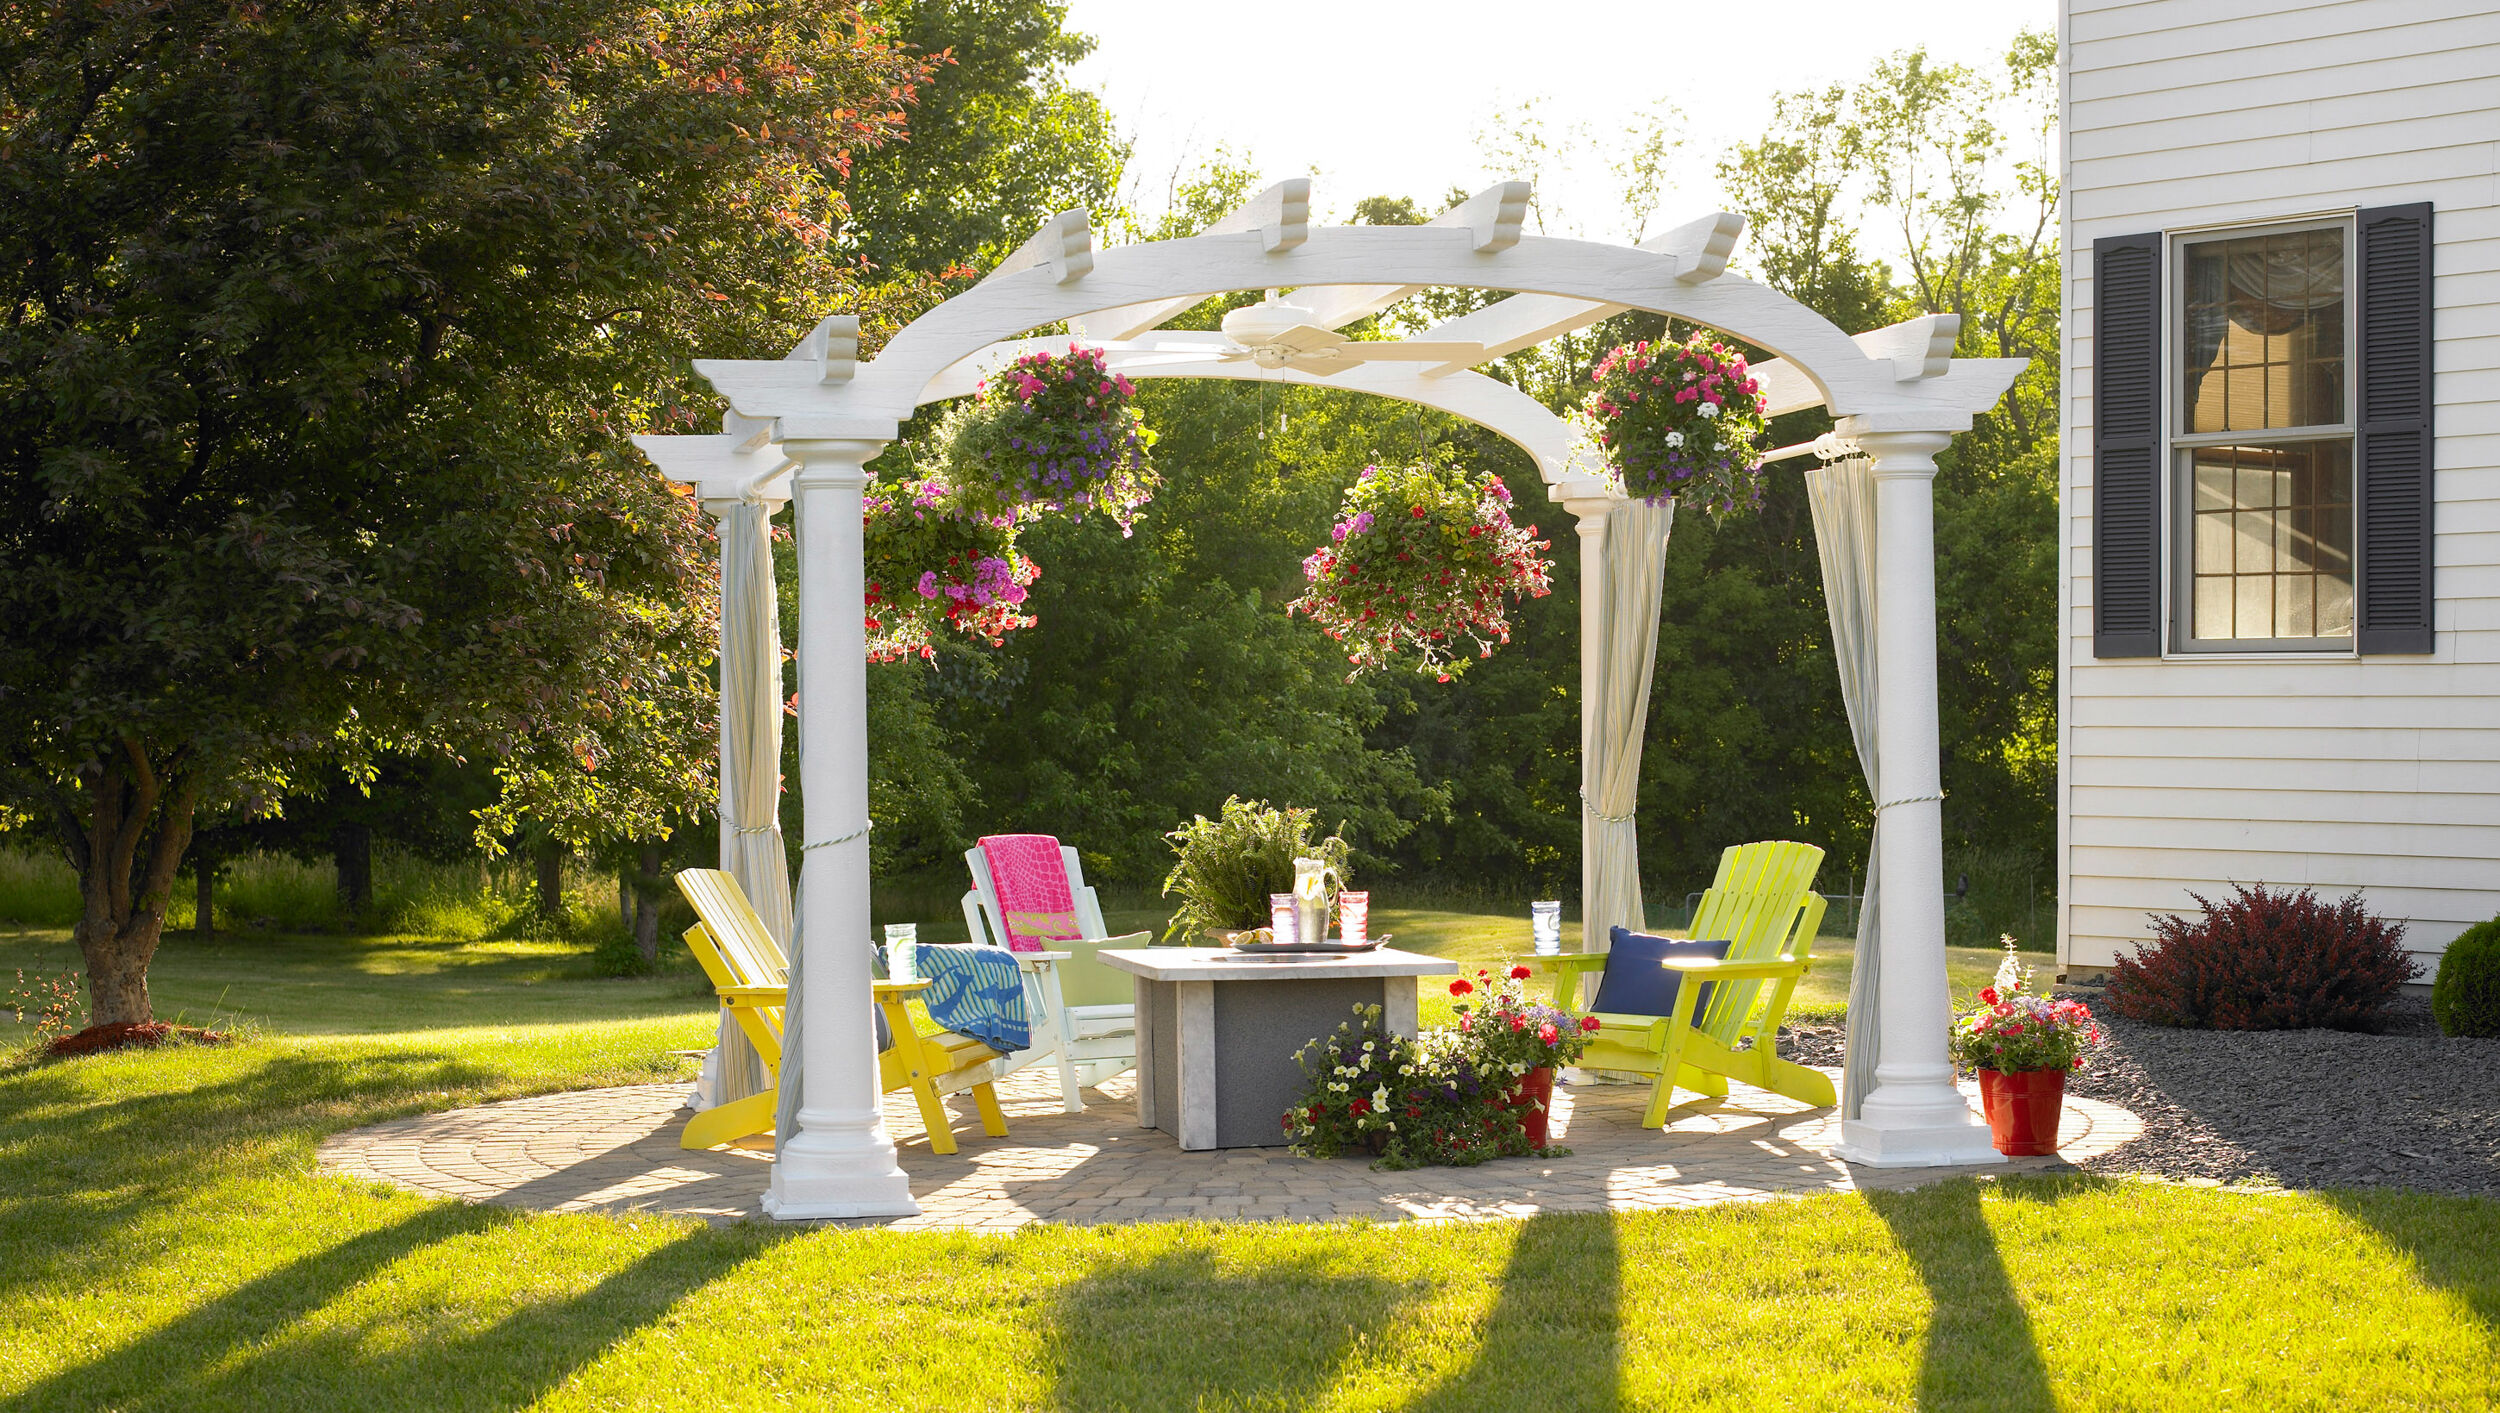 A backyard lounging space under a decorative white gazebo with three lime green plastic lounge chairs, a small gas fire table, and four baskets of flowers hanging from the rafters.